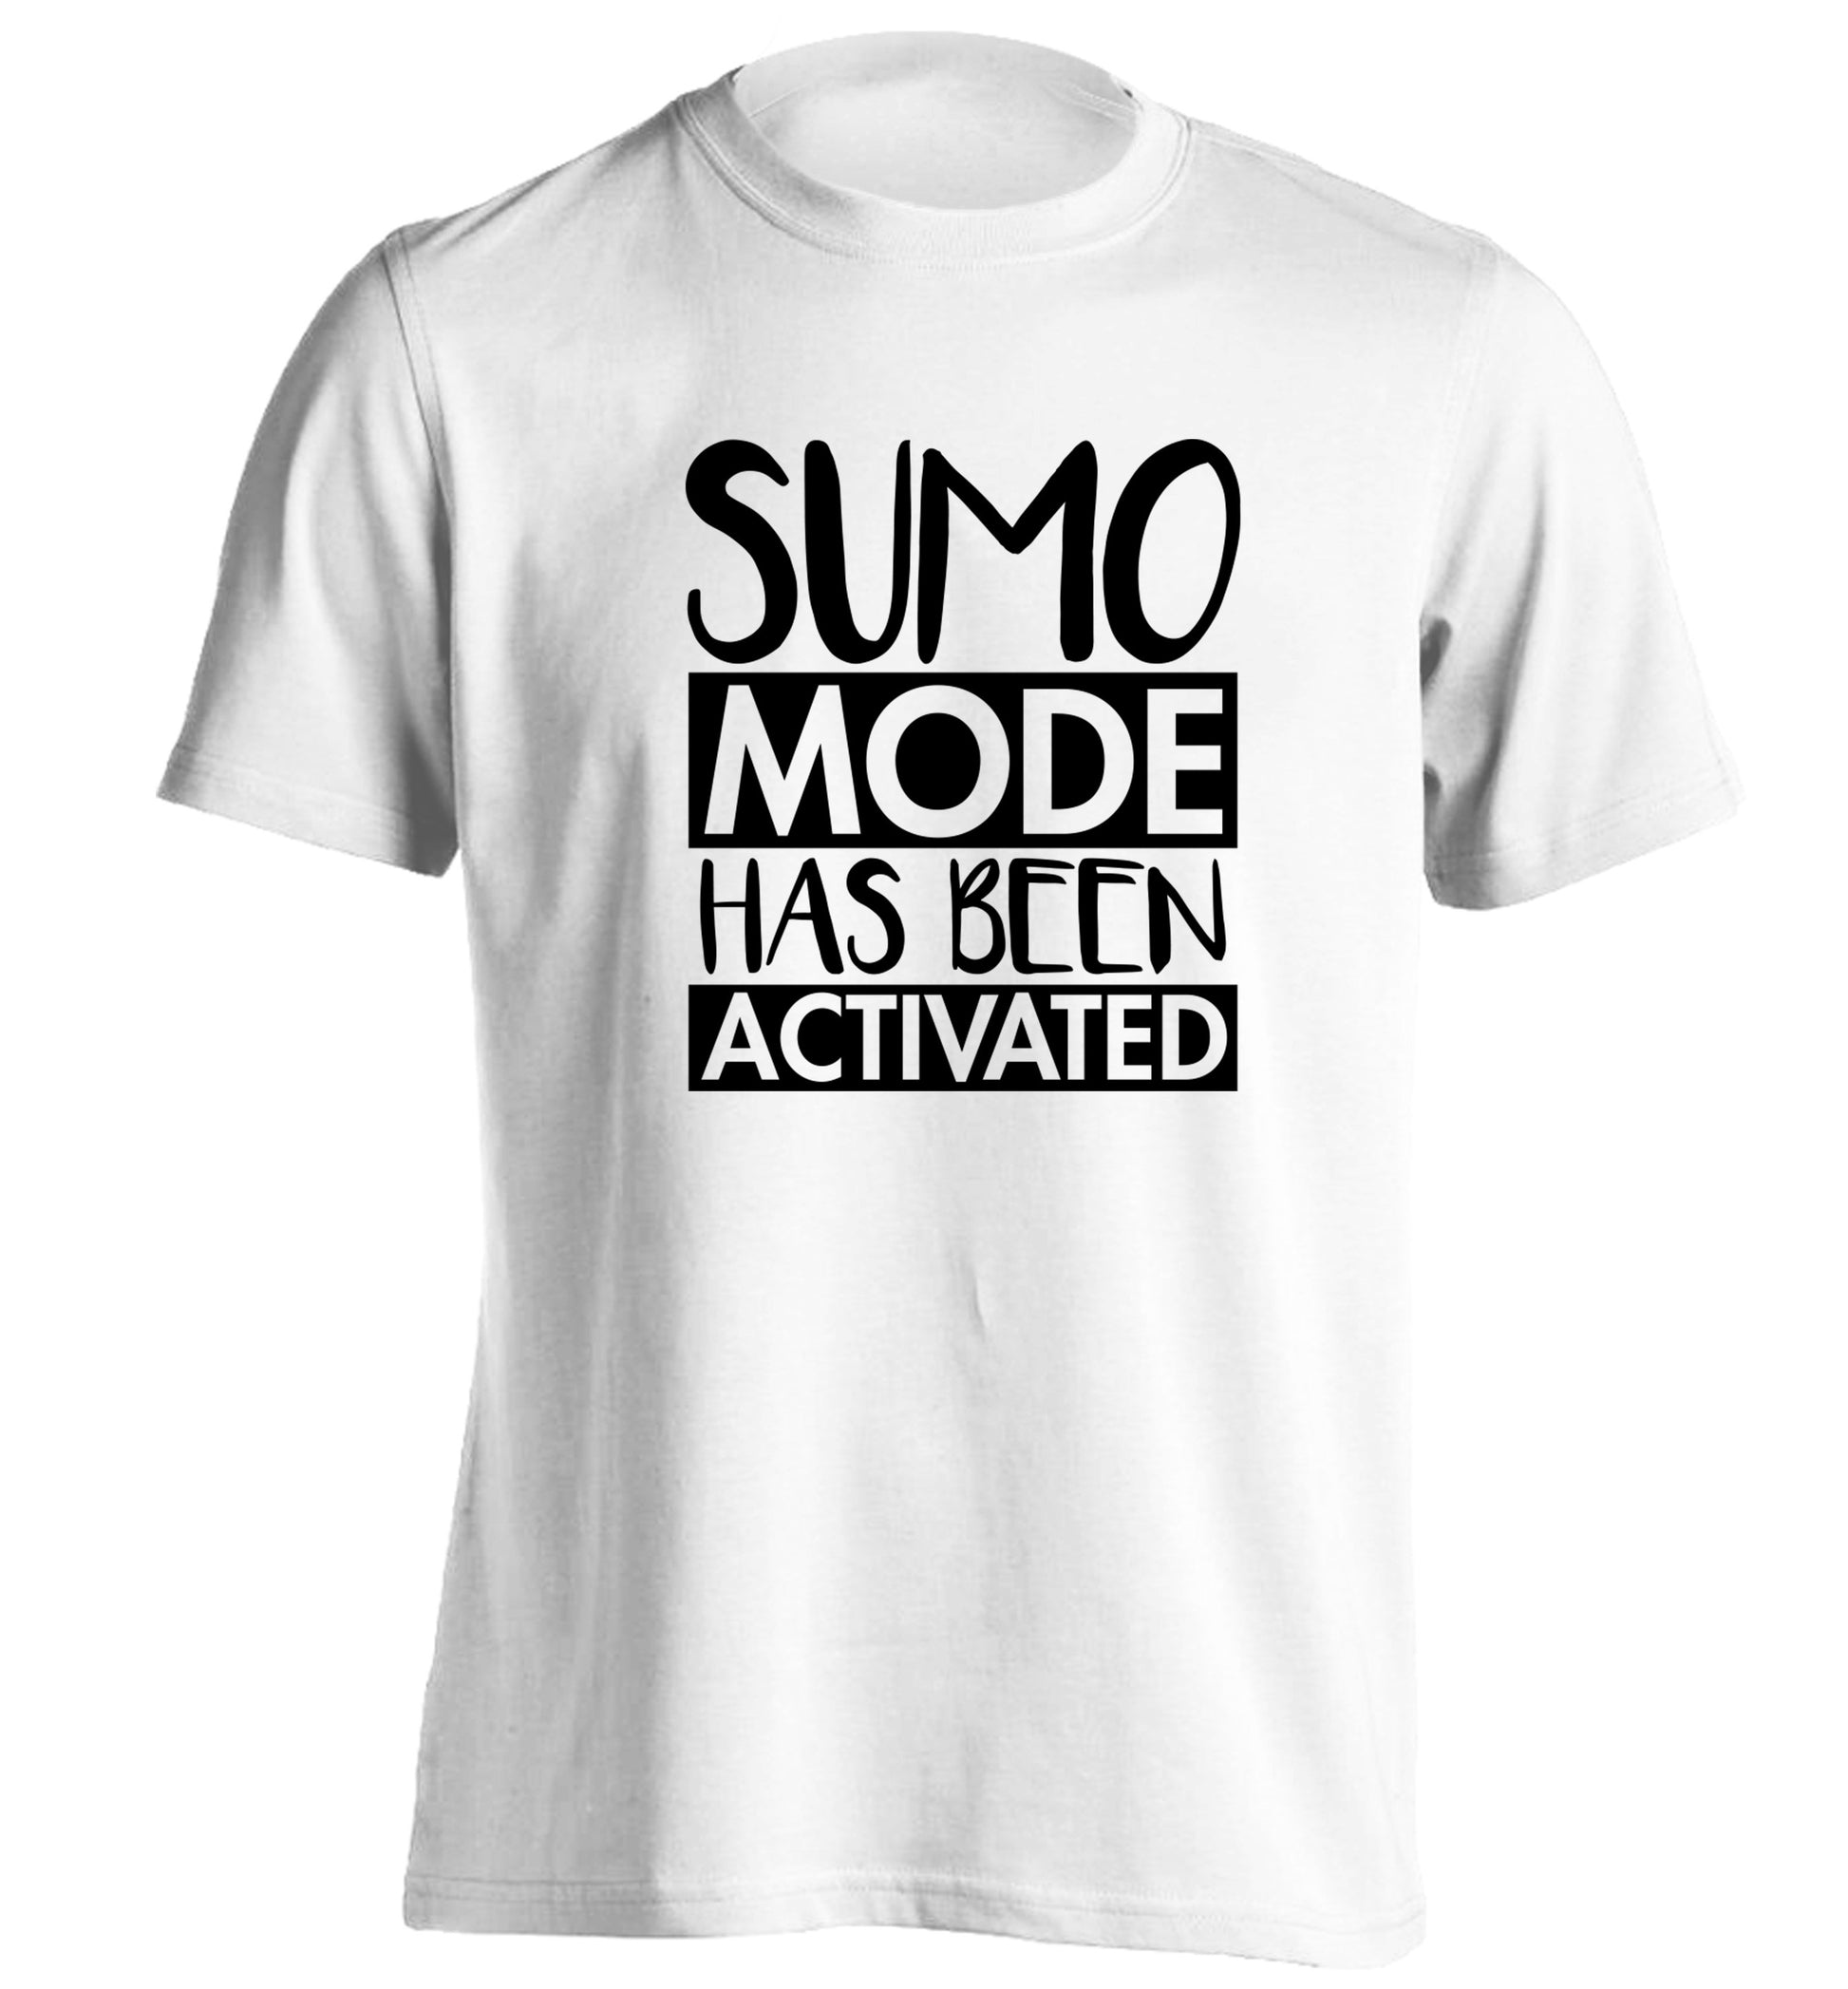 Sumo mode activated adults unisex white Tshirt 2XL